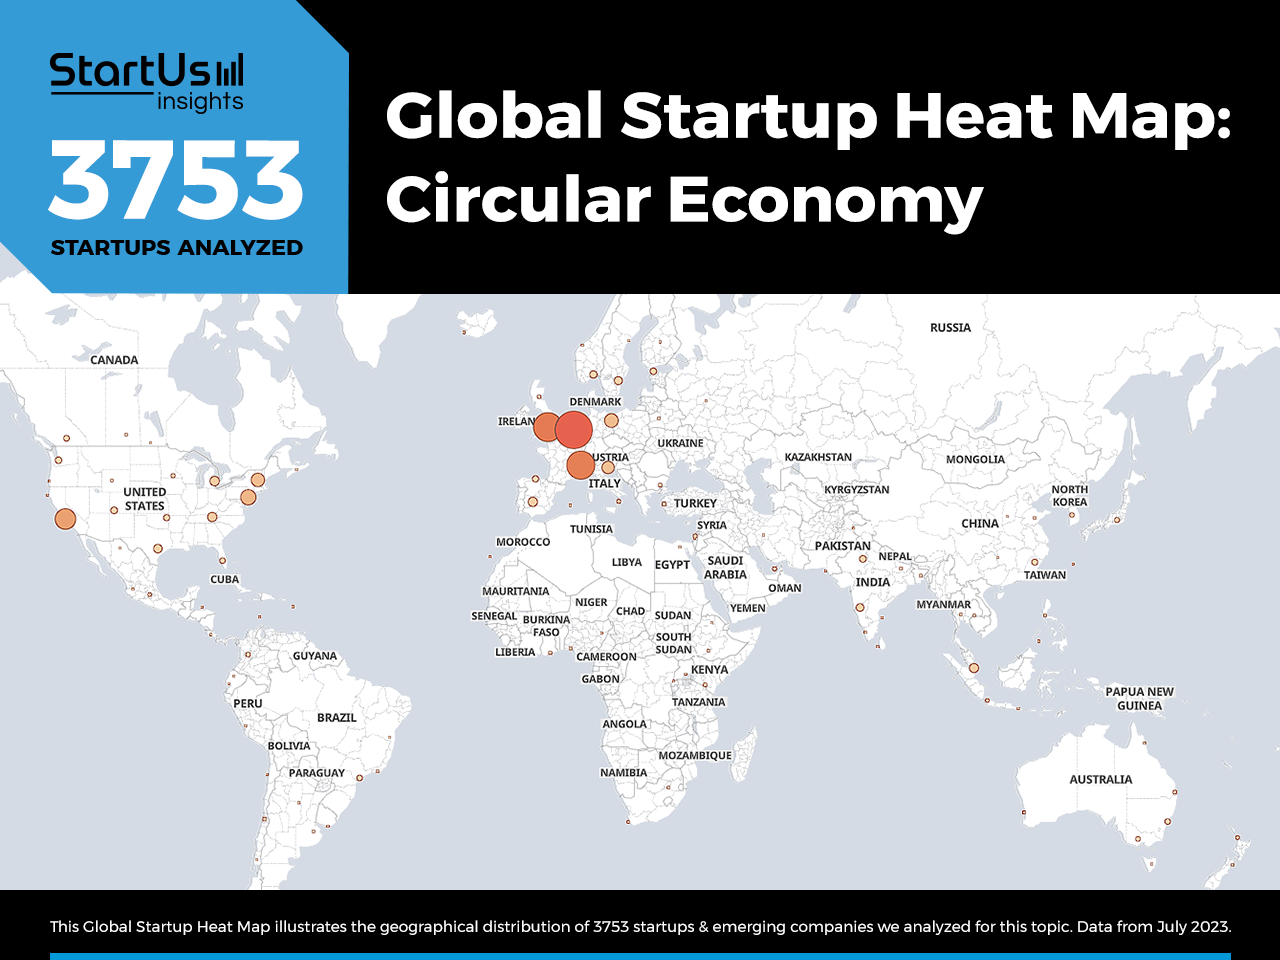 Circular-Economy-Examples-Heat-Map-StartUs-Insights-noresize